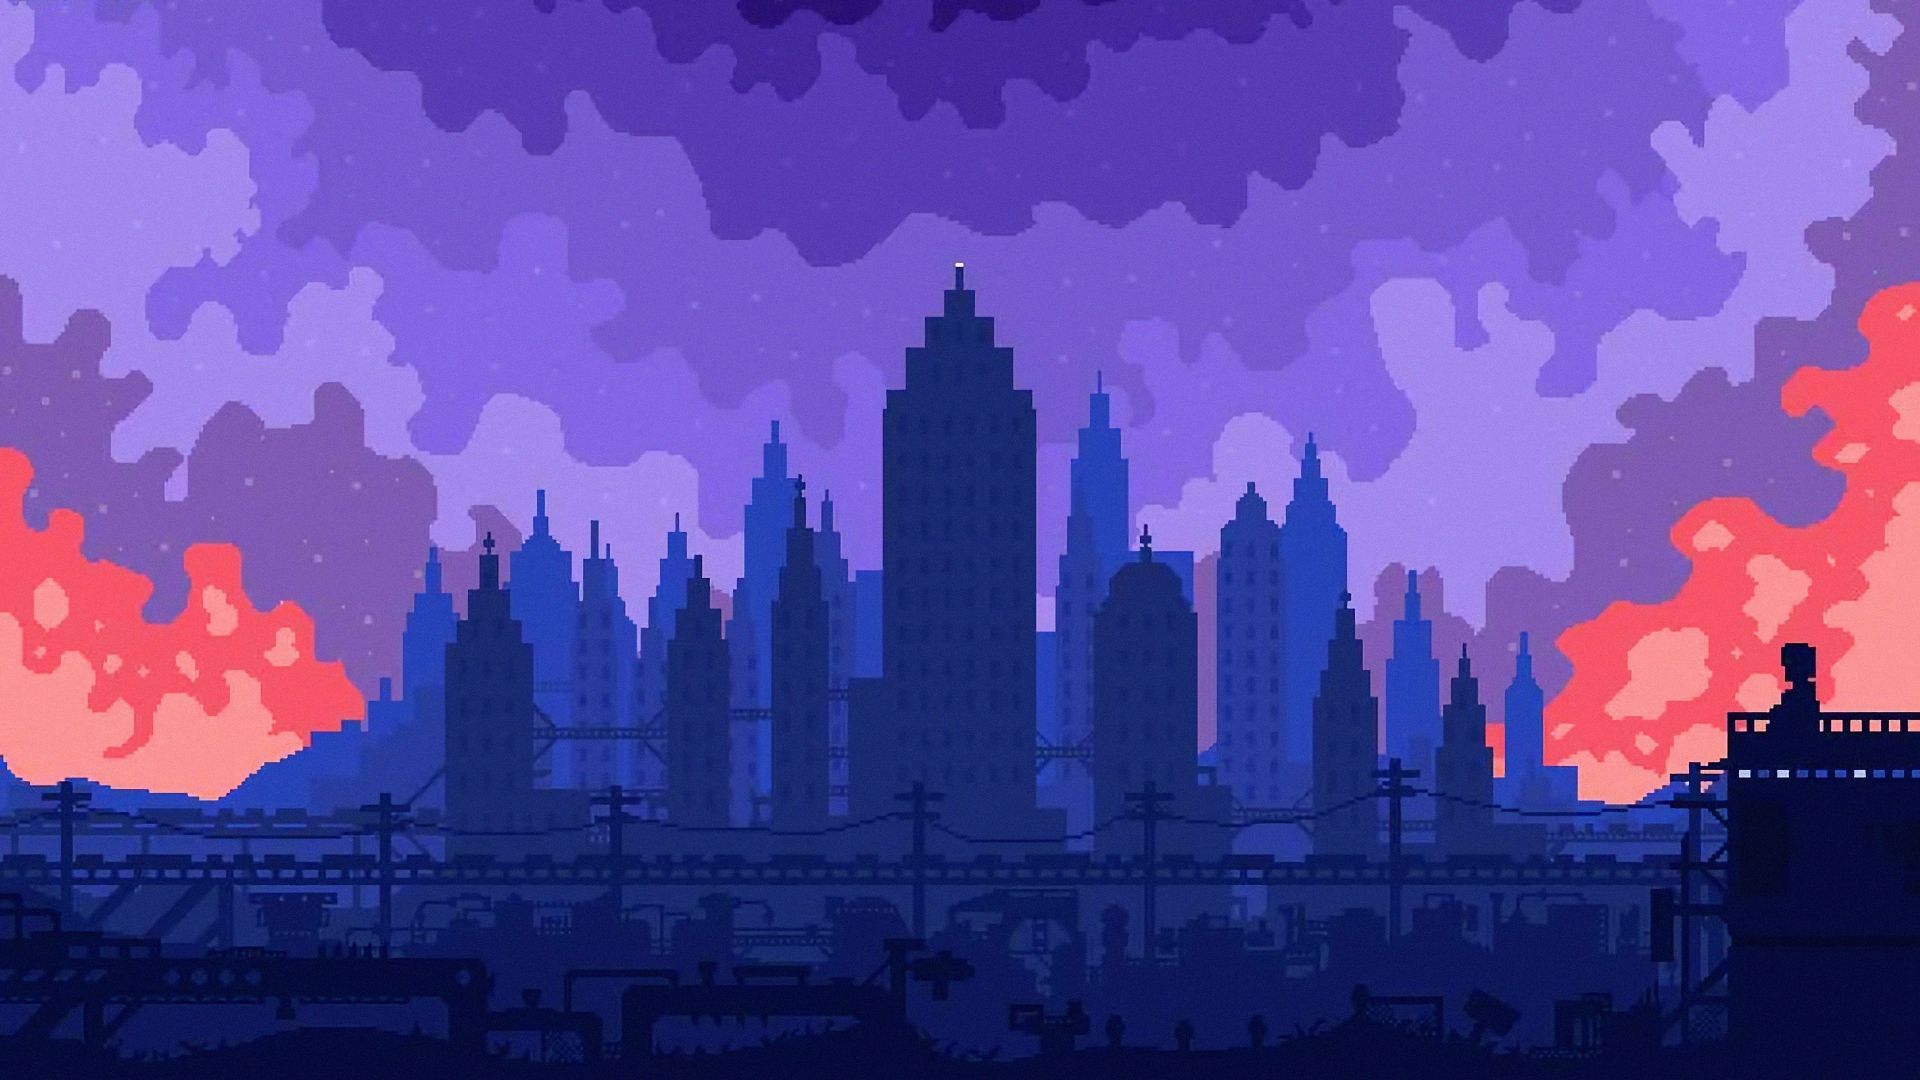 High skies, buildings, silhouette, cityscape, pixel art wallpaper, HD image, picture, background, e9f357